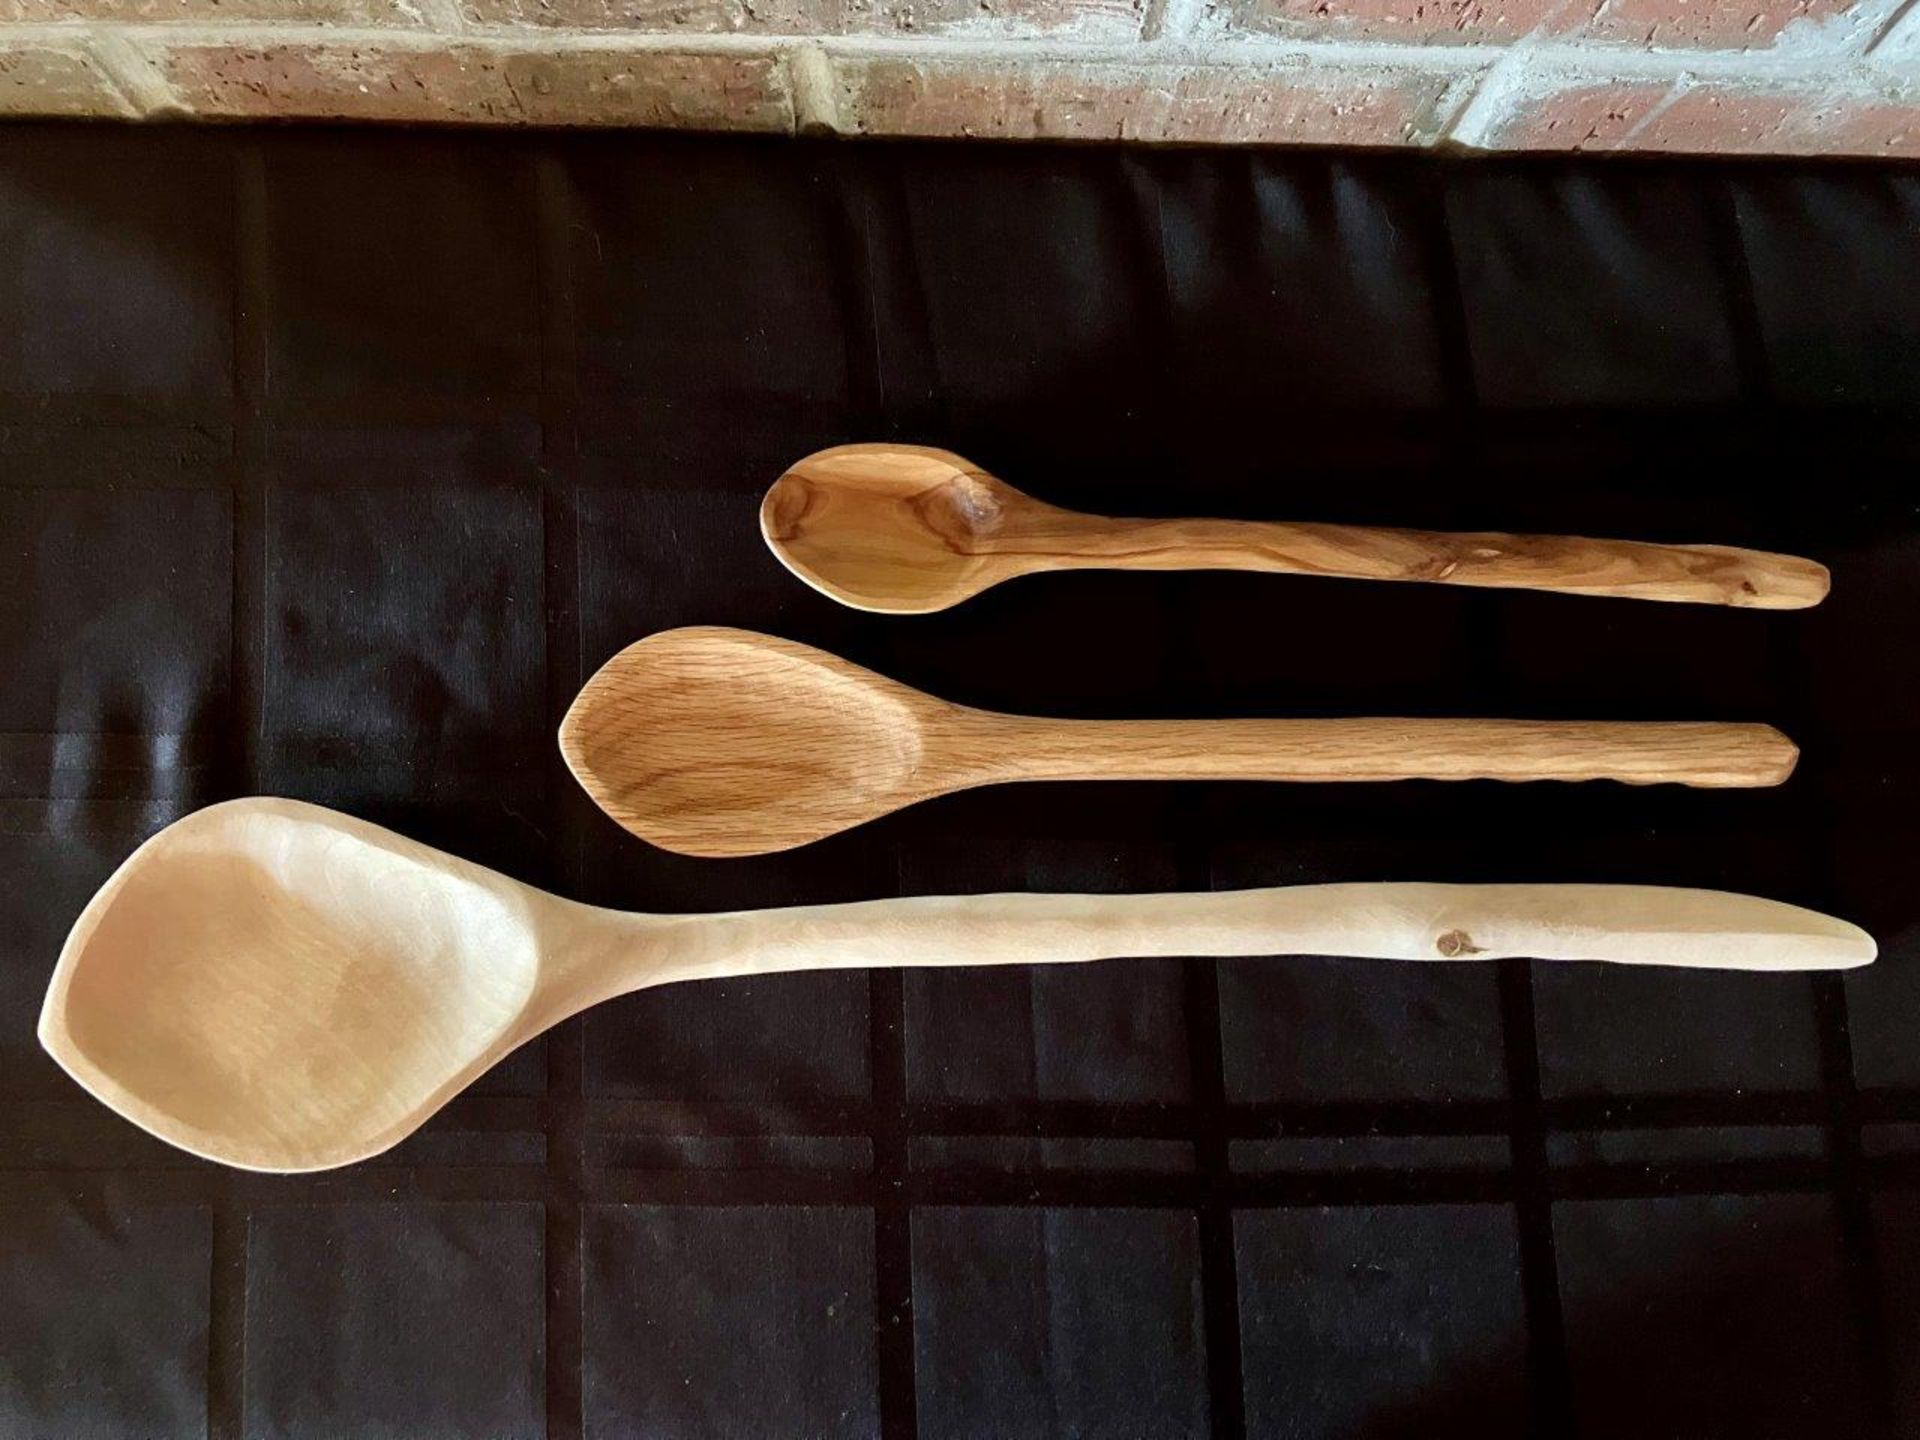 3 HAND CRAFTED WOODEN SPOONS - Image 2 of 2